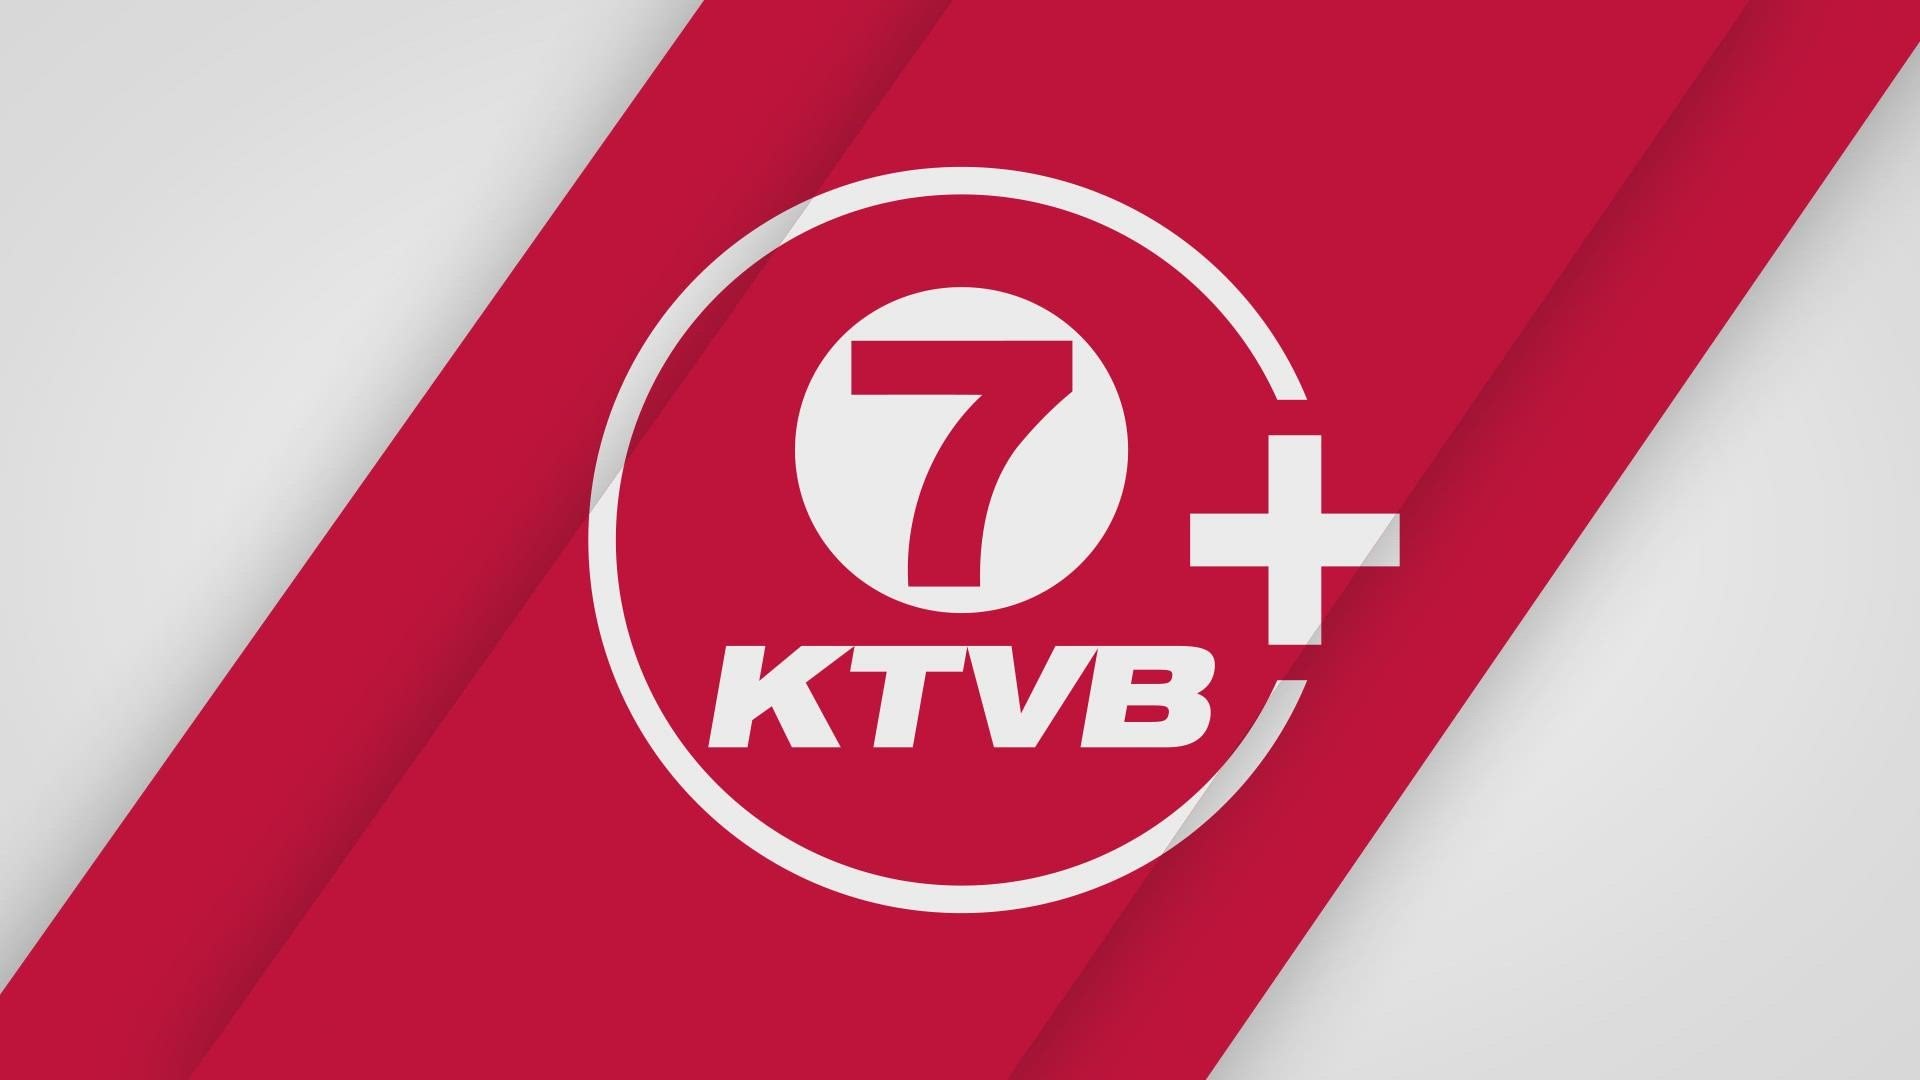 The new KTVB+ app is free on both Roku and Amazon Fire TV devices